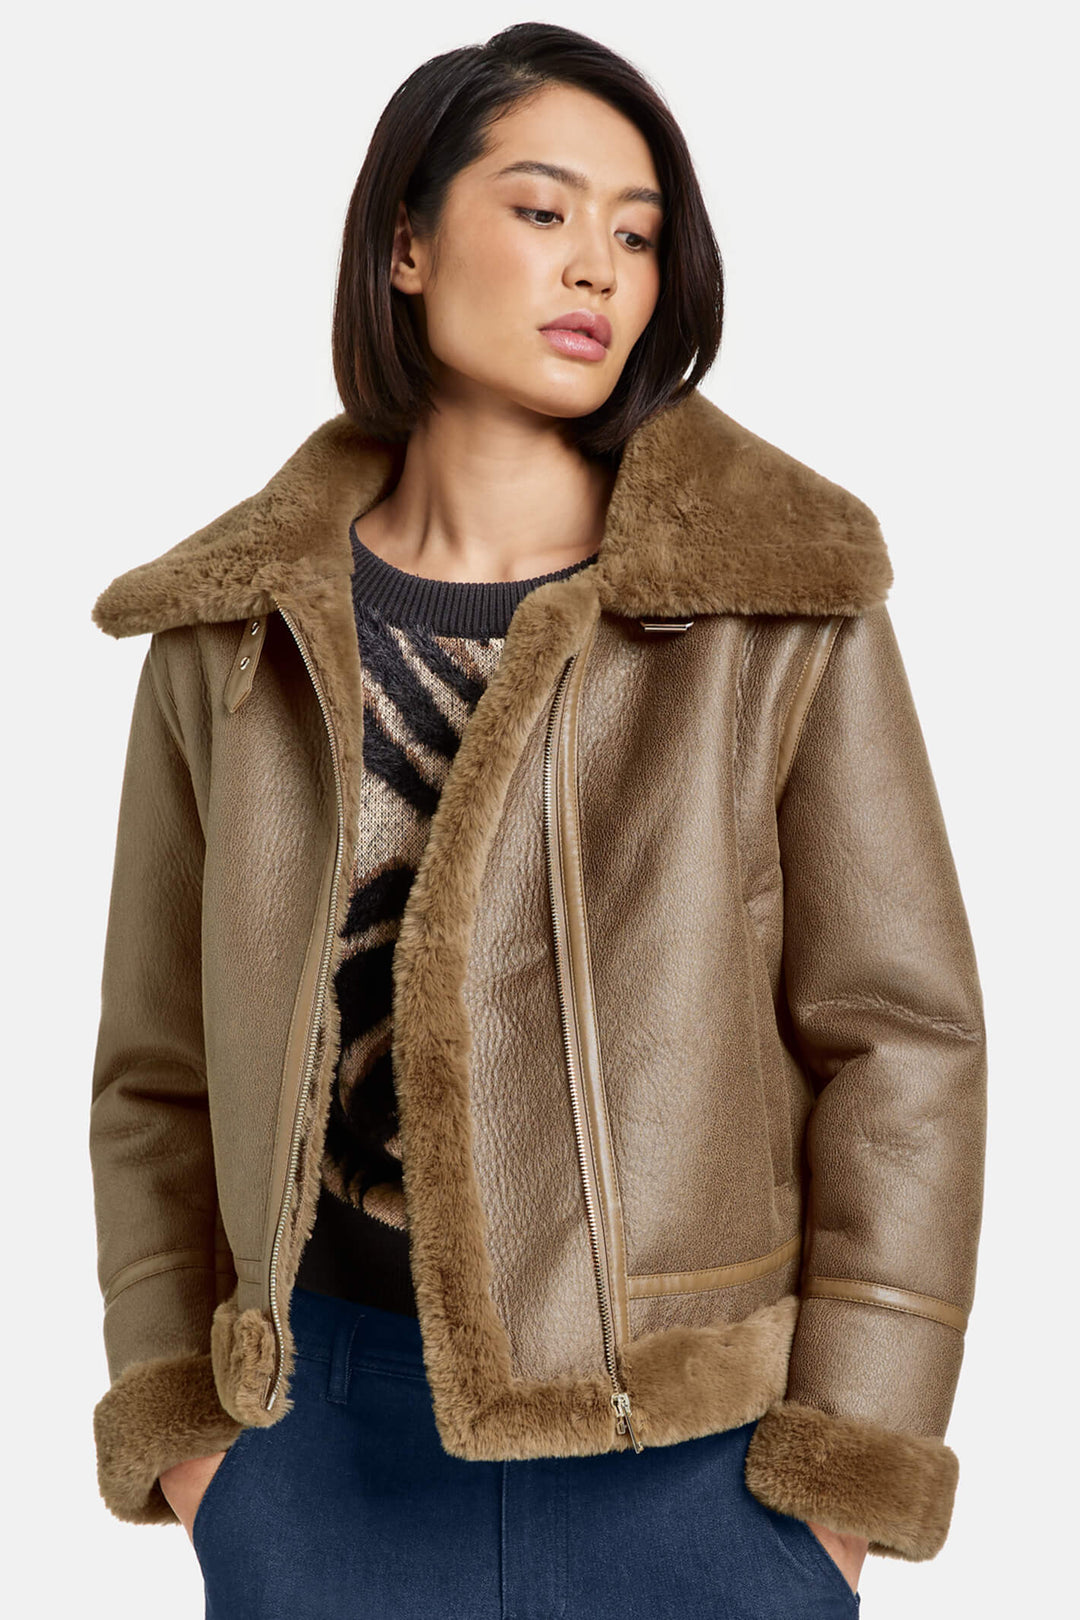 Taifun 450407 Camel Brown Faux Leather Shearling Coat - Experience Boutique